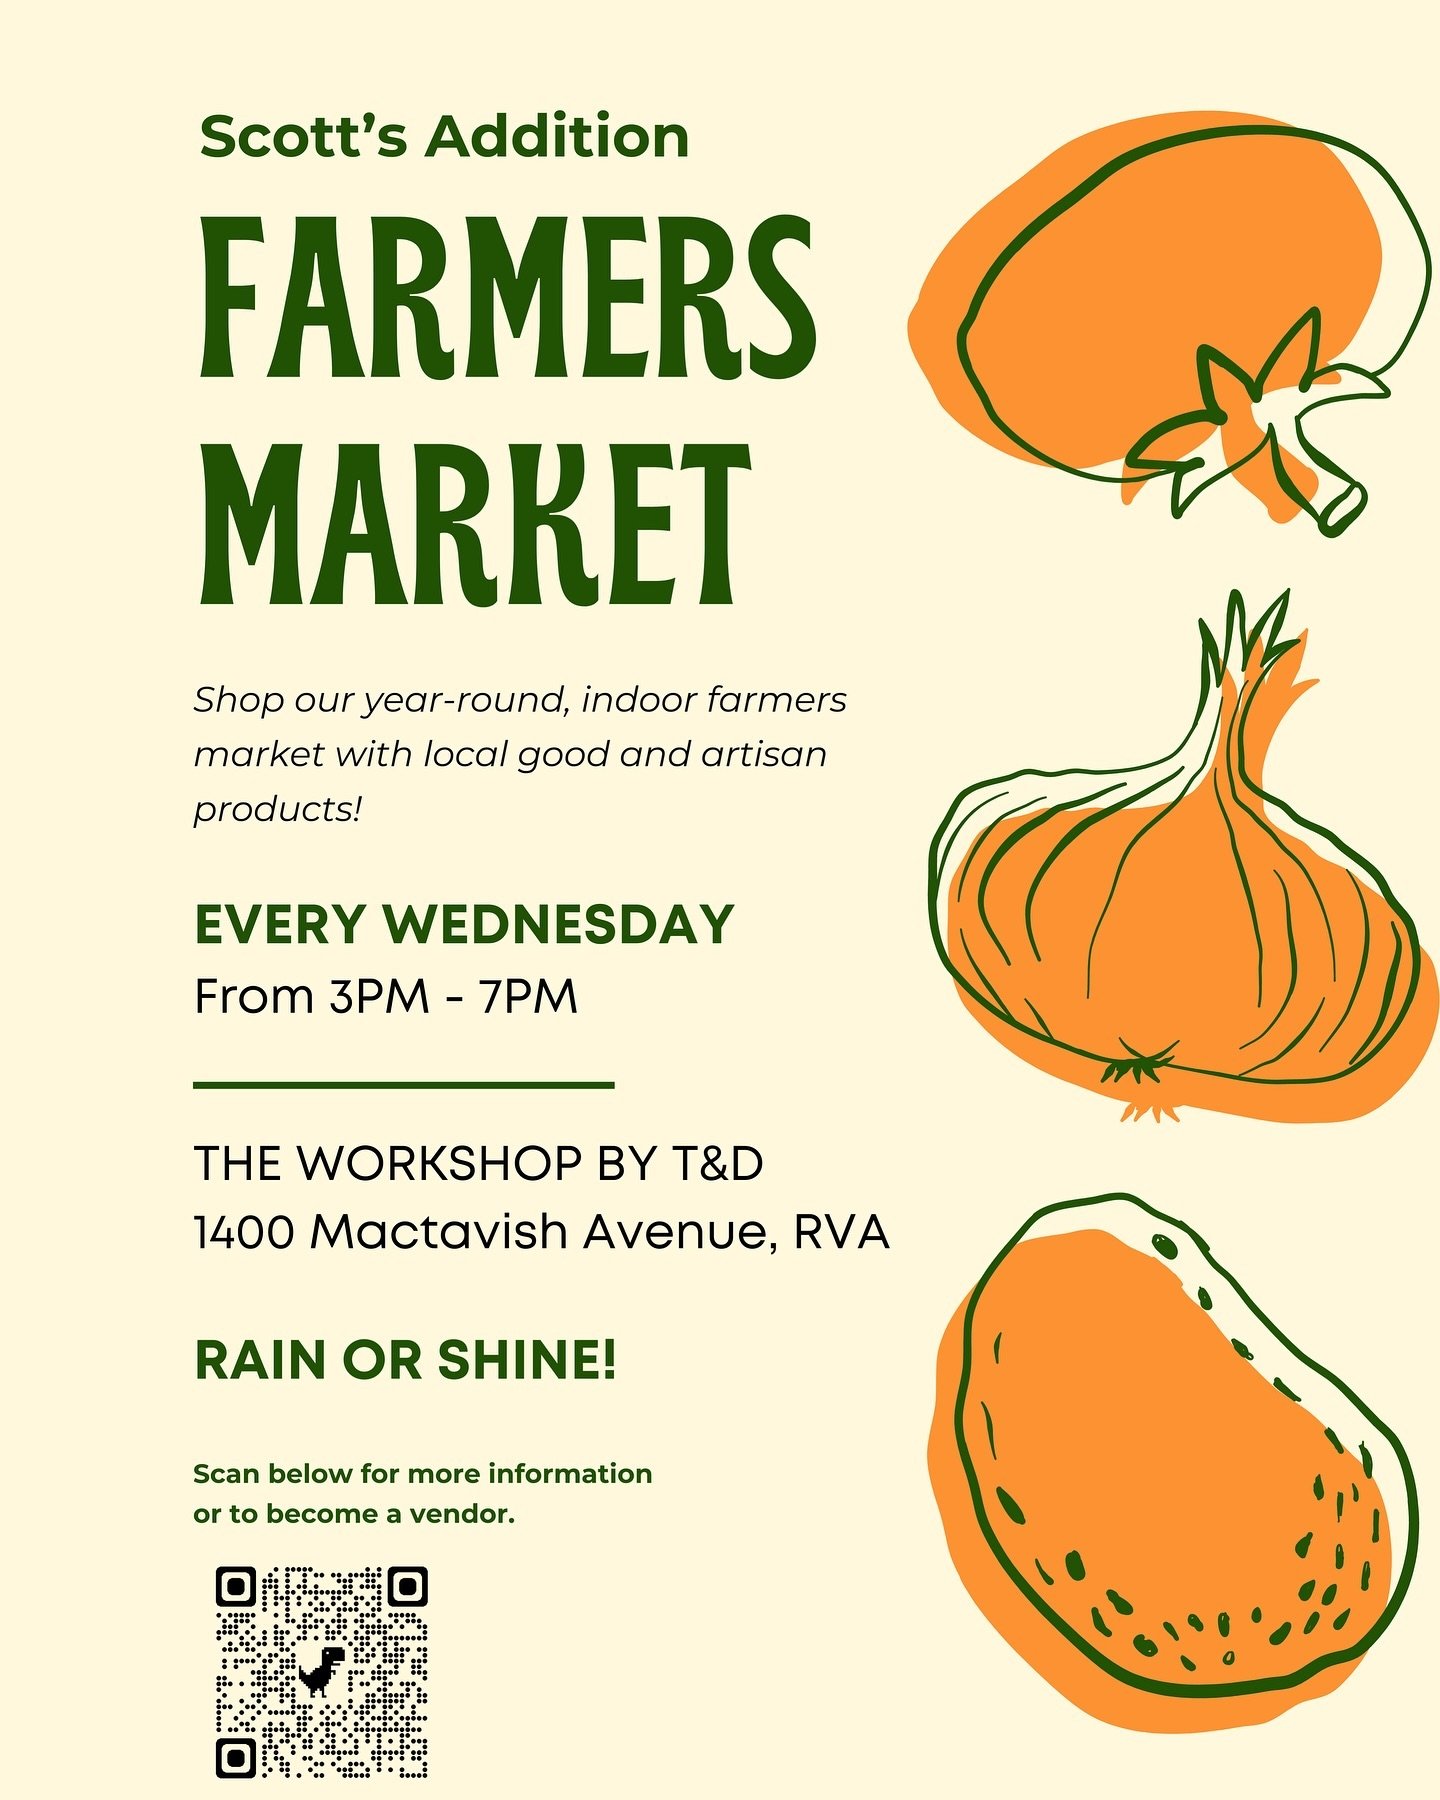 We are so very excited to start this on Wednesday May 8th! Looking forward to being a staple in the neighborhood and bringing in locally produced goods and artisans. 

#notyouraverageevents #scottsadditionfarmersmarket